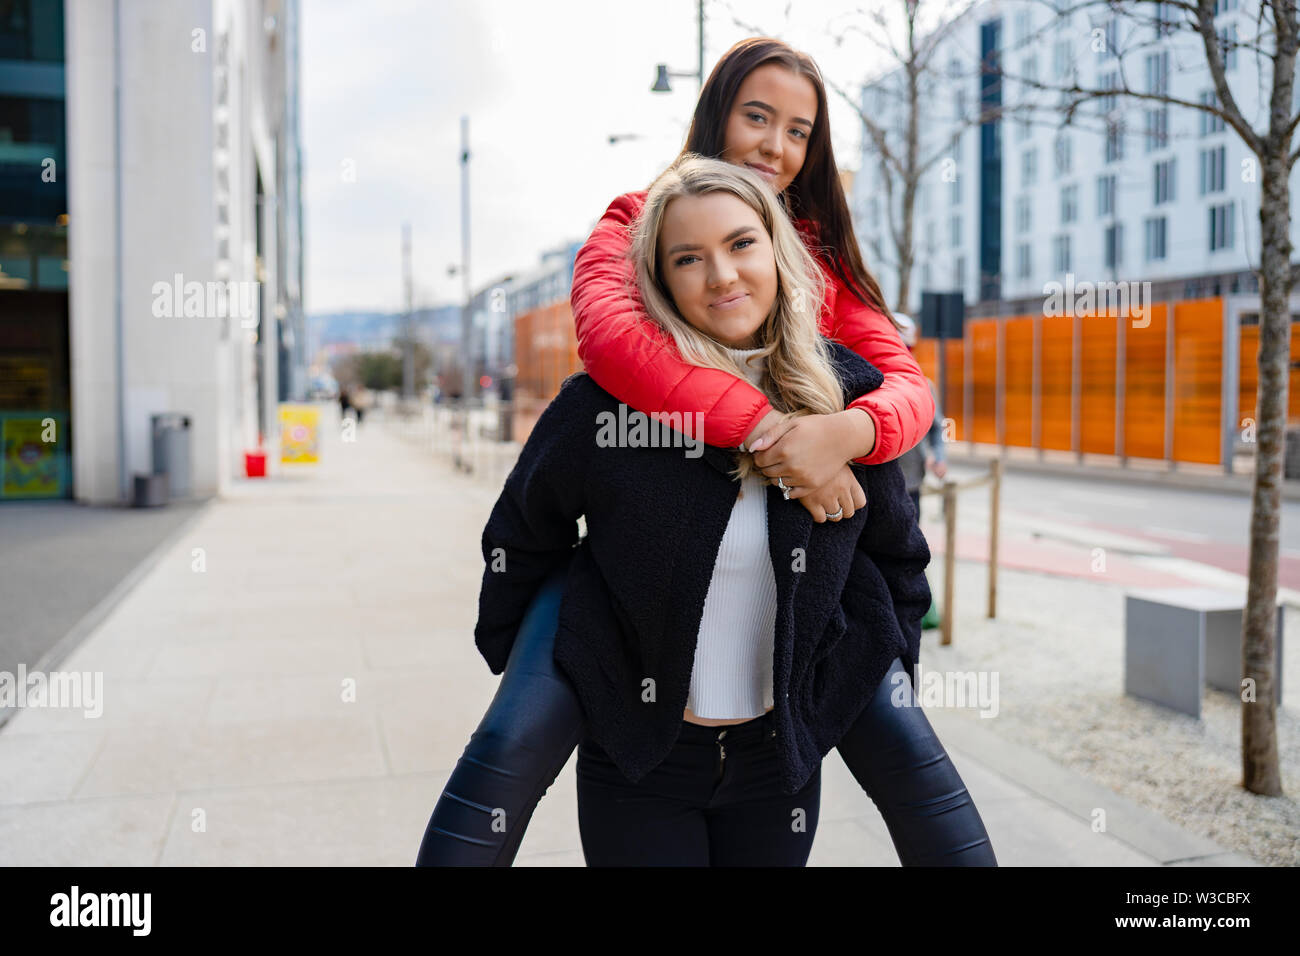 Smiling Female Friends Having Fun and Piggybacking In City Environment Stock Photo